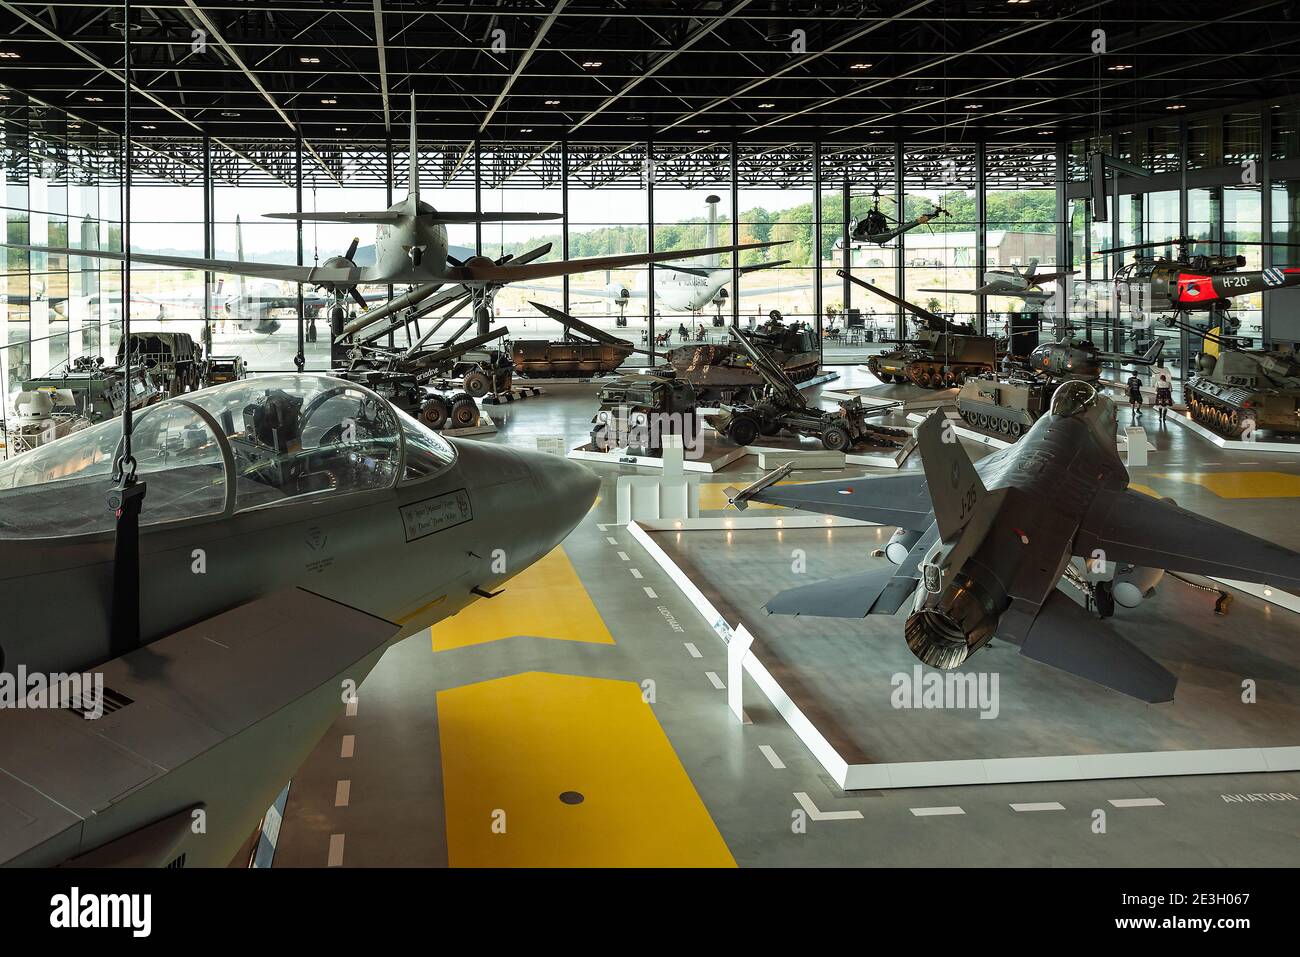 Interior of the beautiful Nationaal Militair Museum at Soesterberg, The Netherlands. Stock Photo